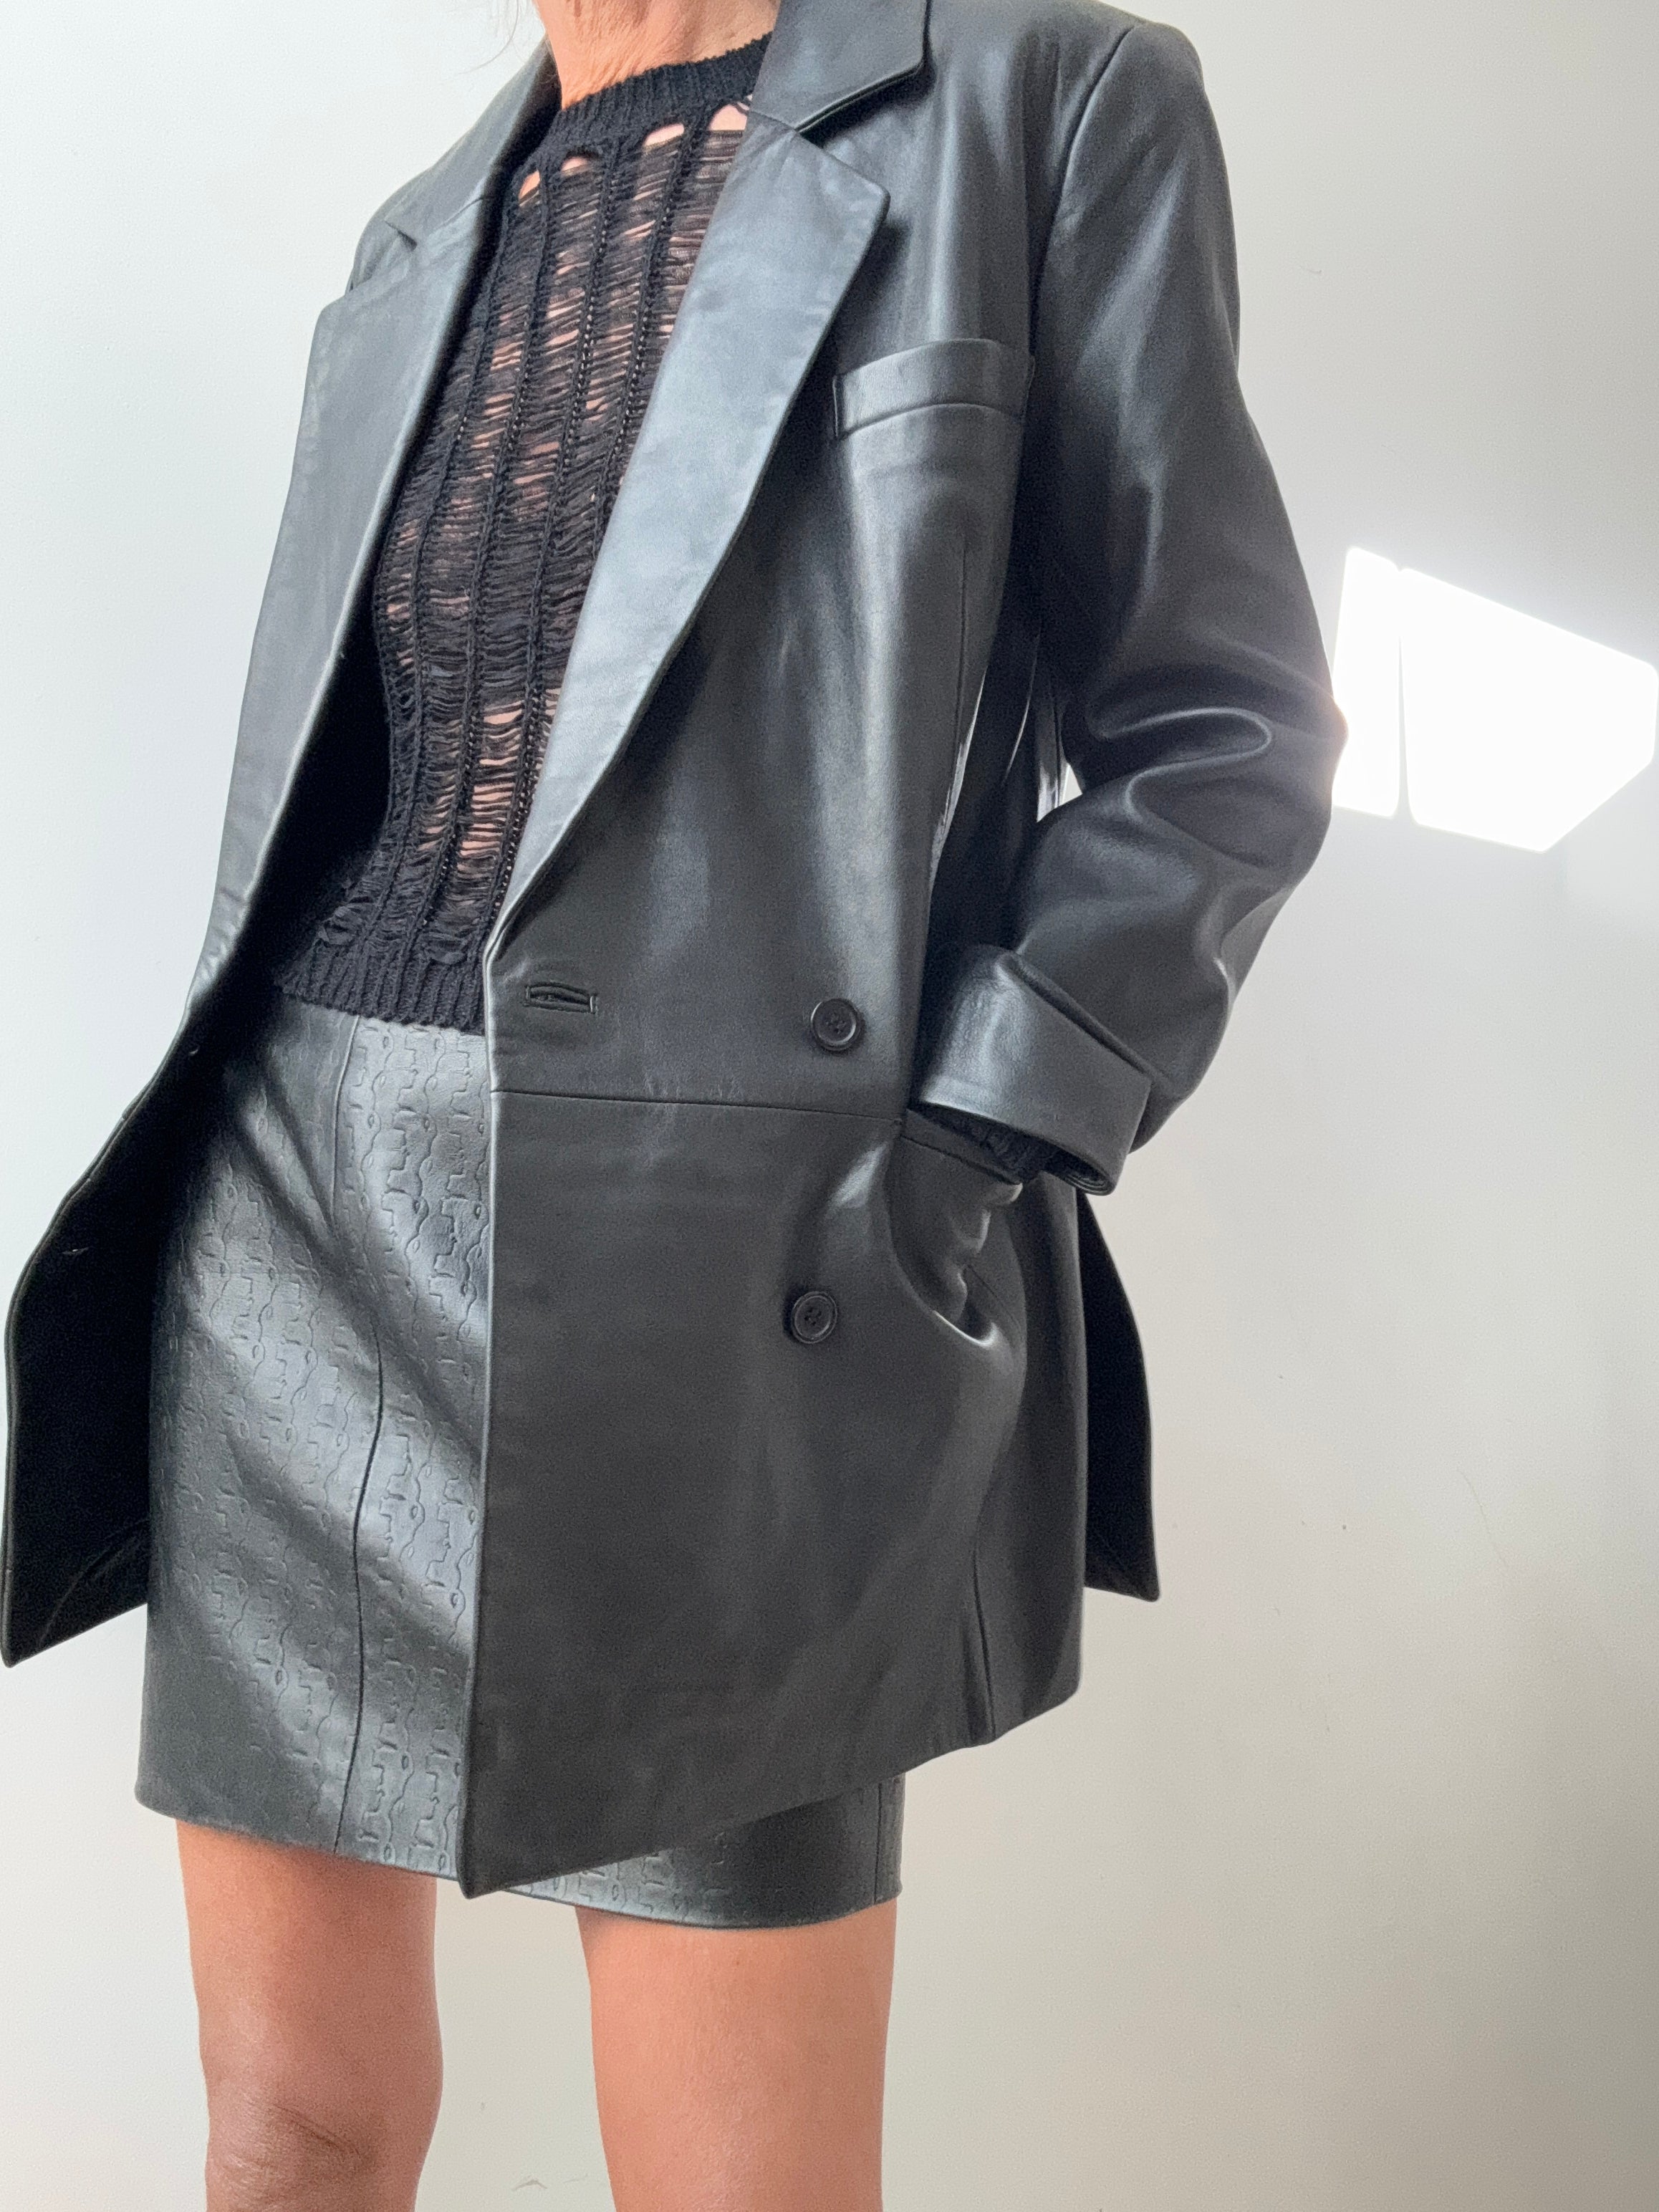 Reformation Jackets Reformation Veda Dalia Relaxed Leather Blazer